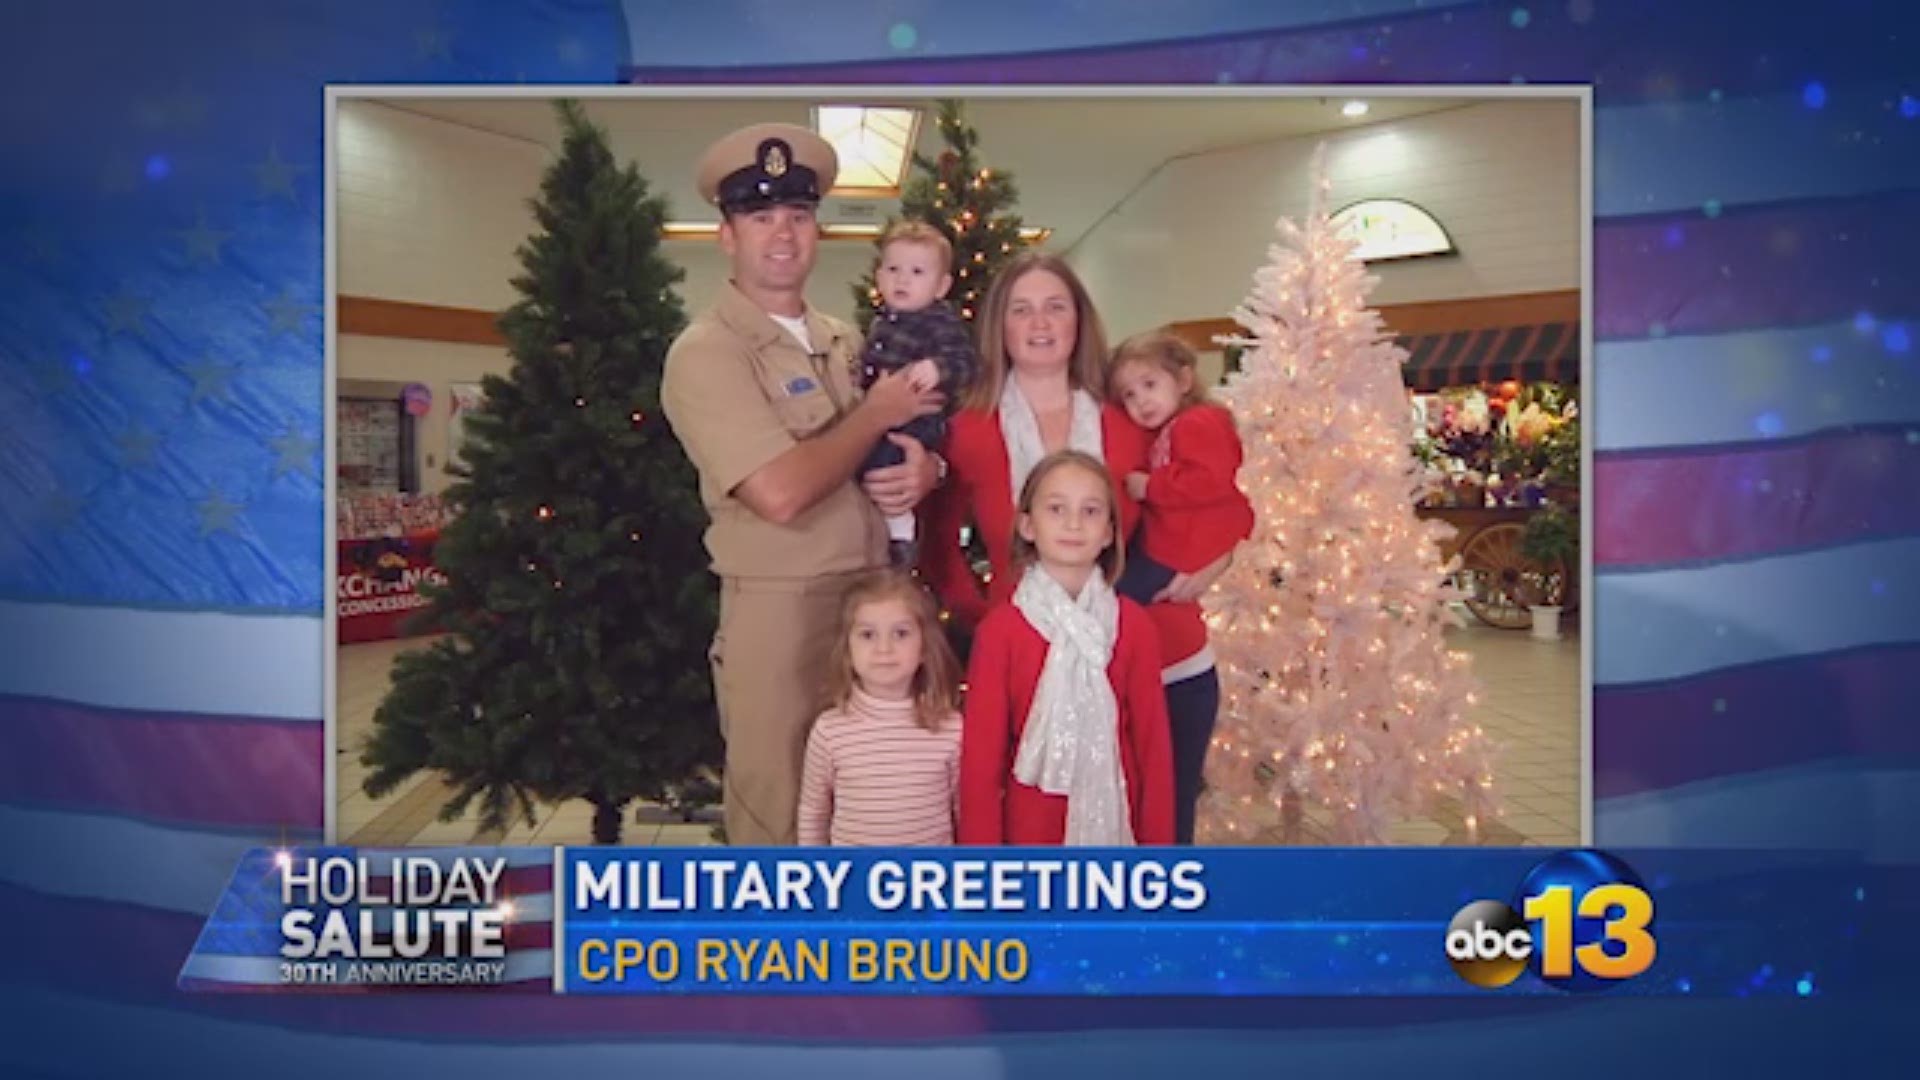 Military greetings from SPC Leon Fraser, and CPO Ryan Bruno and his family.